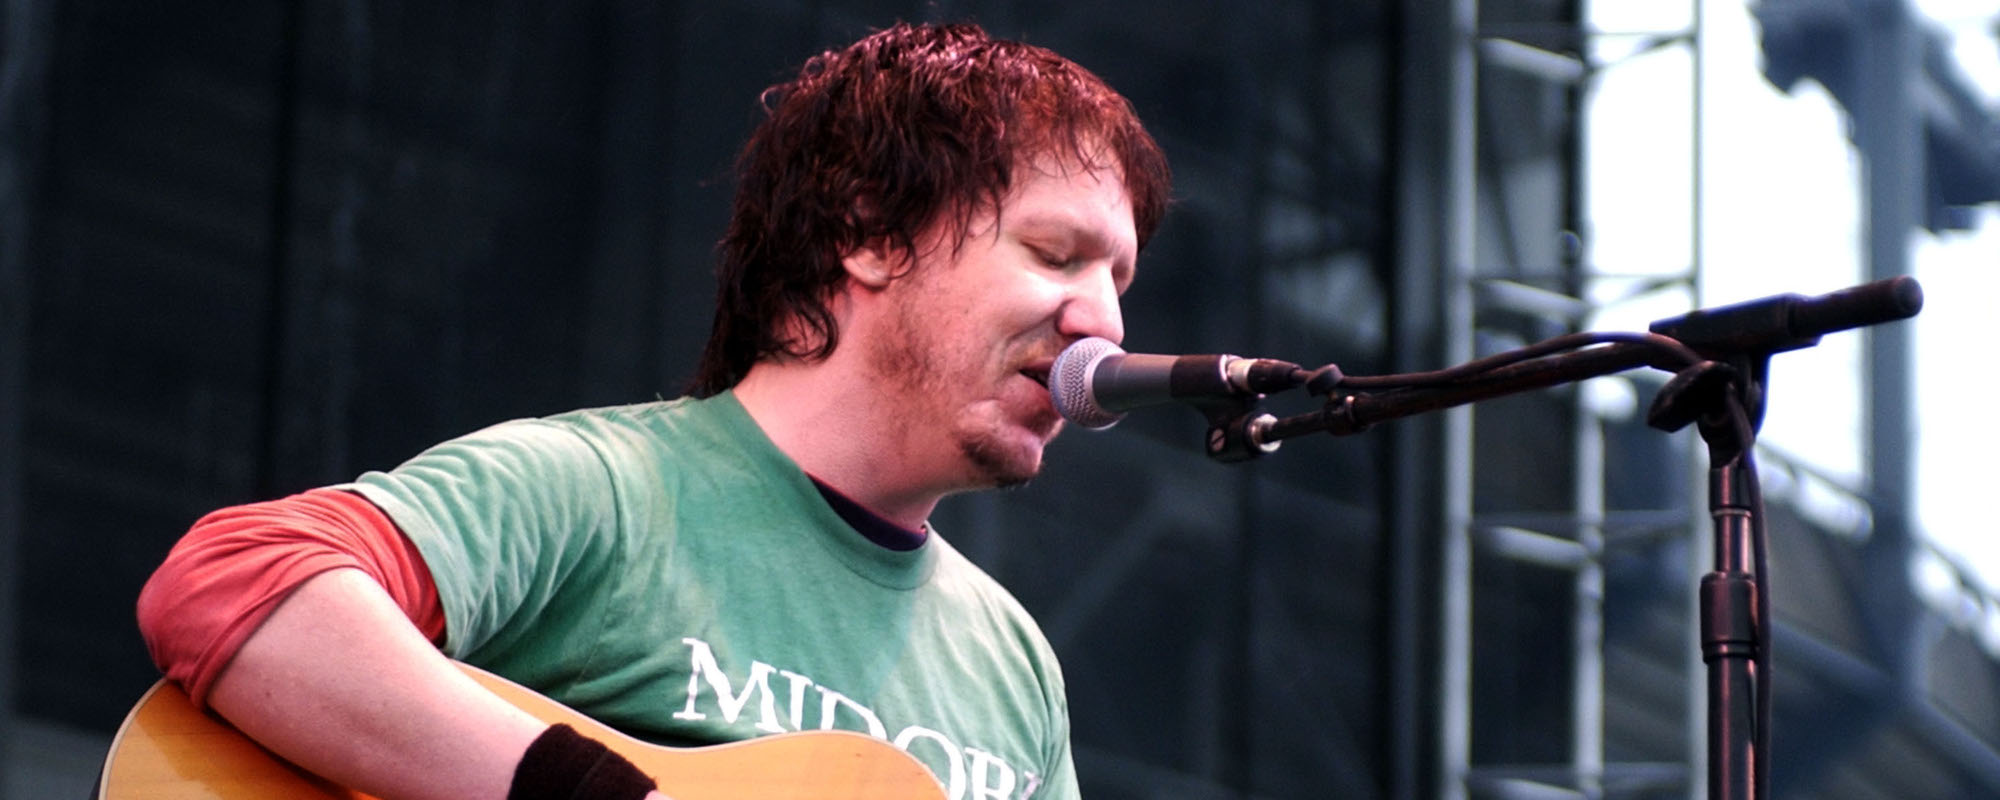 Remember When: Elliott Smith Broke Out While His Band Collapsed